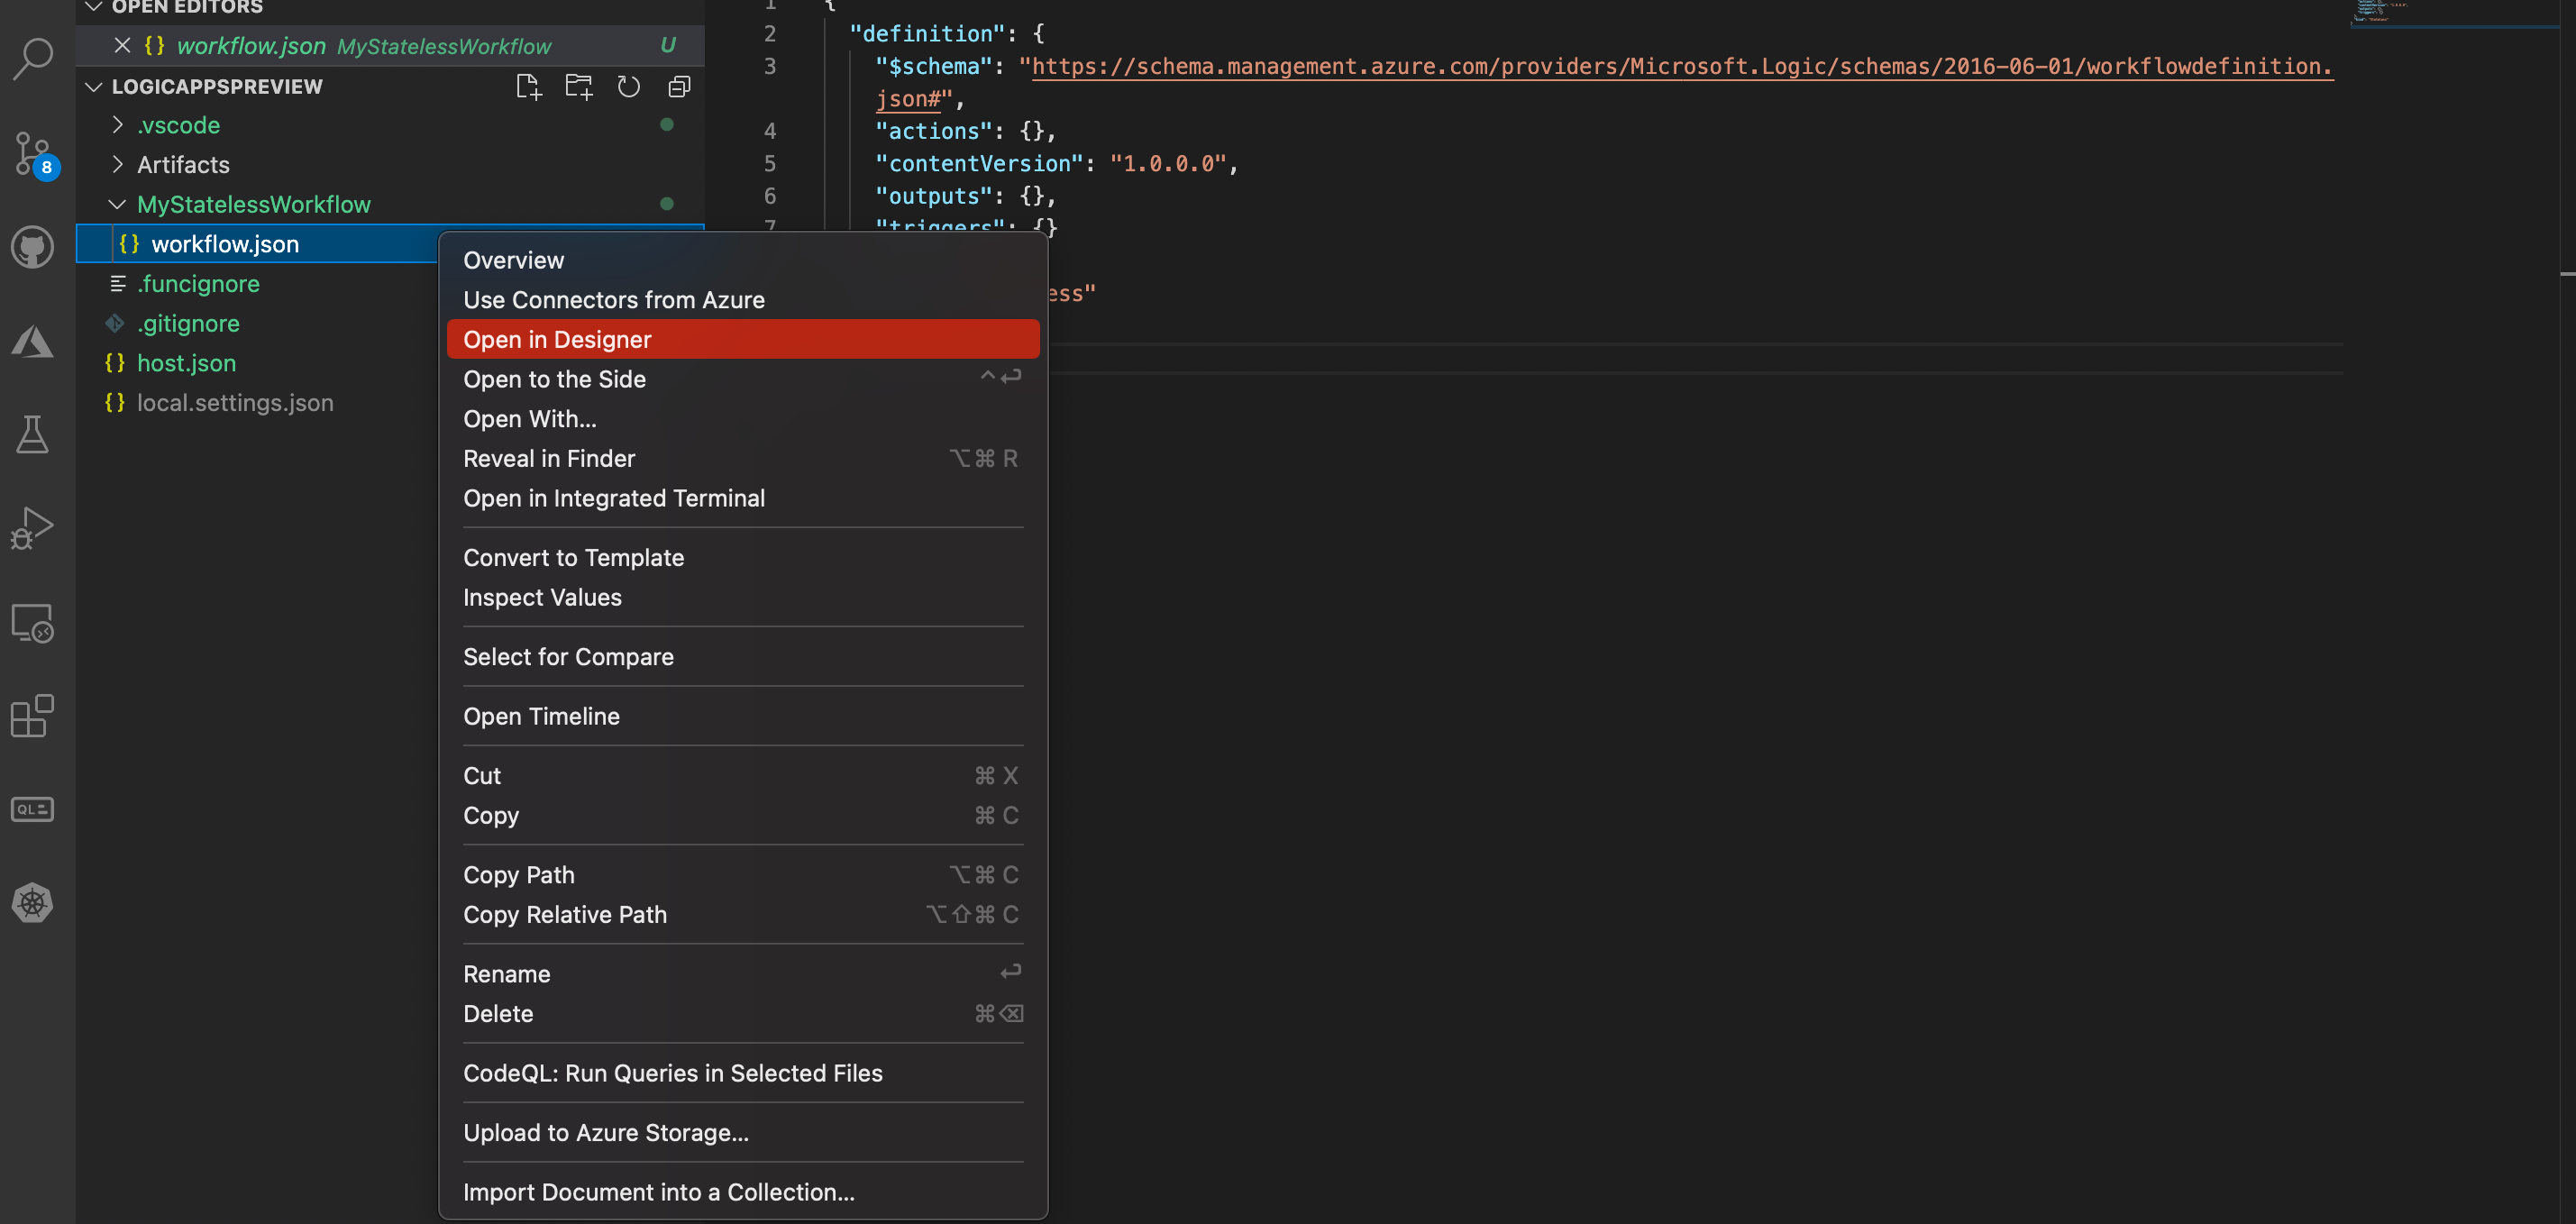 Screenshot showing the menu options when right clicking the workflow.json file